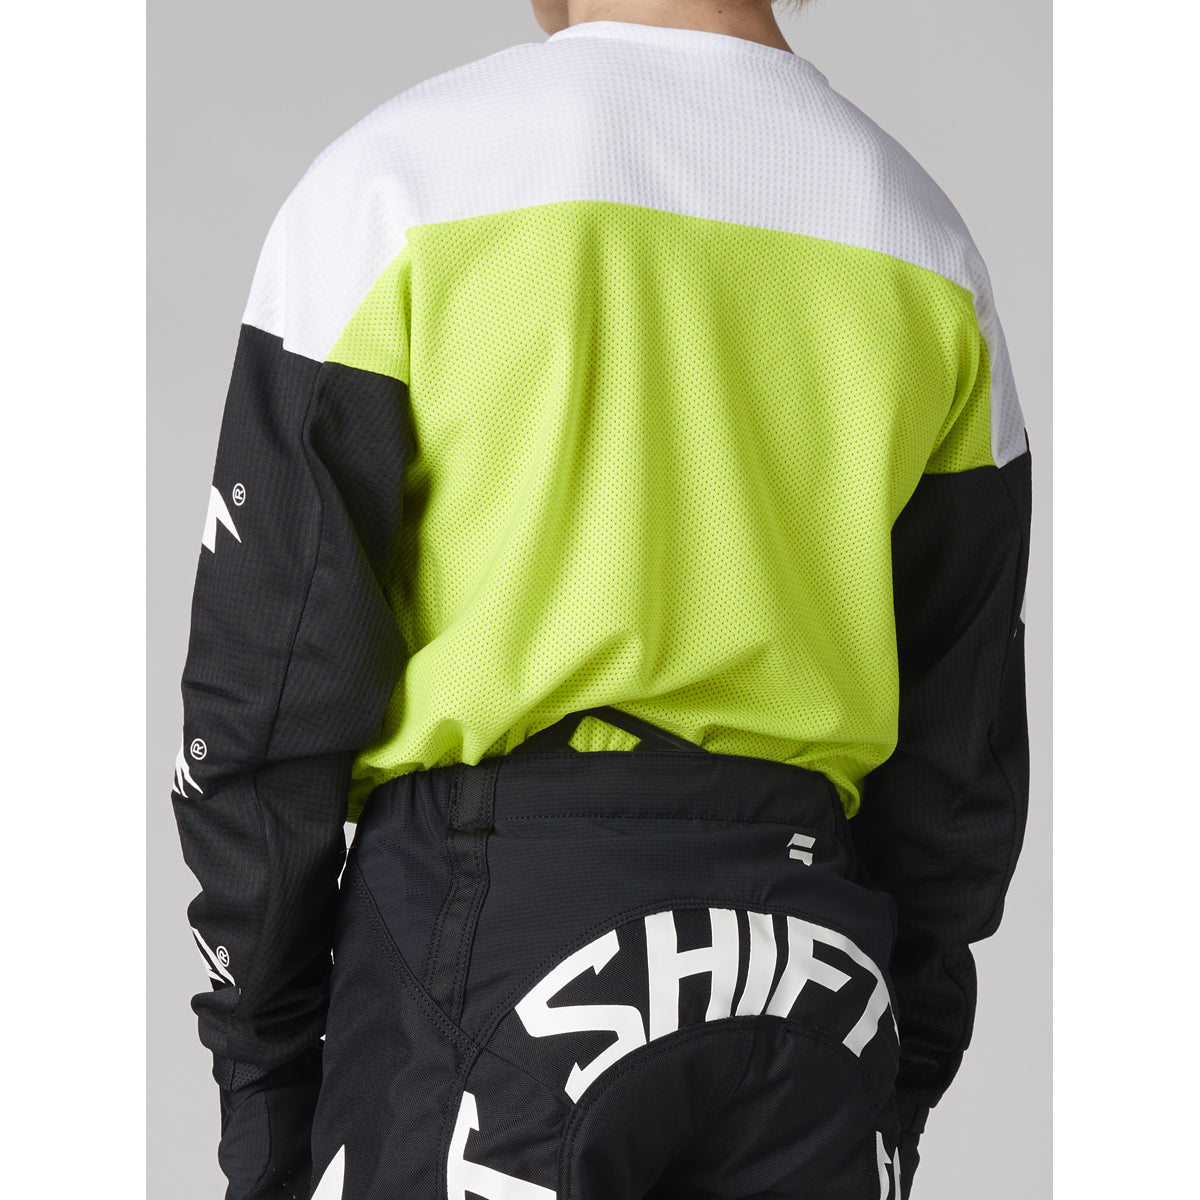 Youth White Label Flame Jersey Flo Yellow